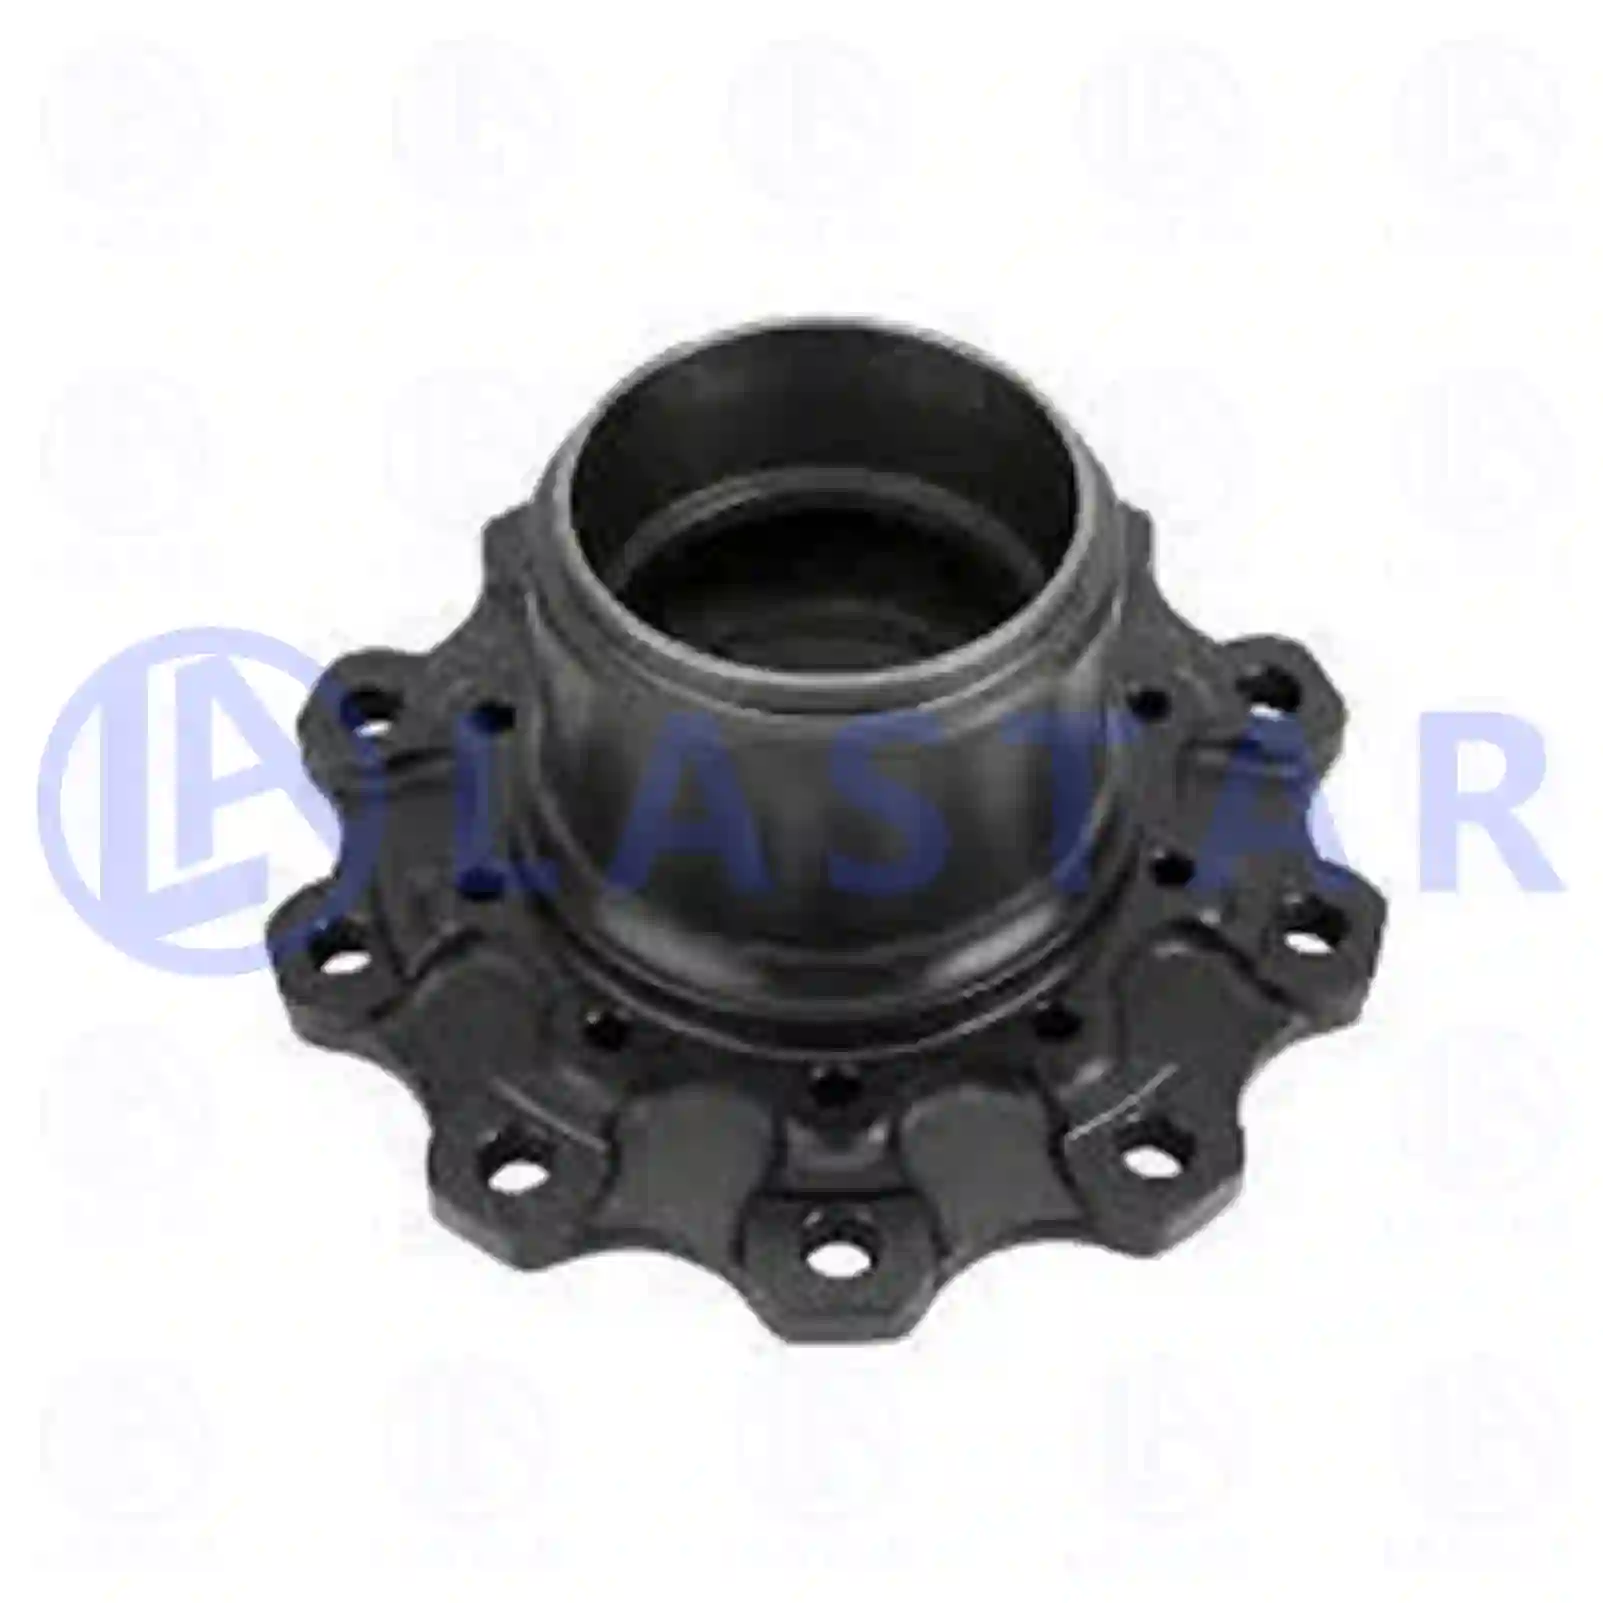 Wheel hub, without bearings, 77726308, 9423340201, 9423340701, 9423341201, 9423341501, , , ||  77726308 Lastar Spare Part | Truck Spare Parts, Auotomotive Spare Parts Wheel hub, without bearings, 77726308, 9423340201, 9423340701, 9423341201, 9423341501, , , ||  77726308 Lastar Spare Part | Truck Spare Parts, Auotomotive Spare Parts